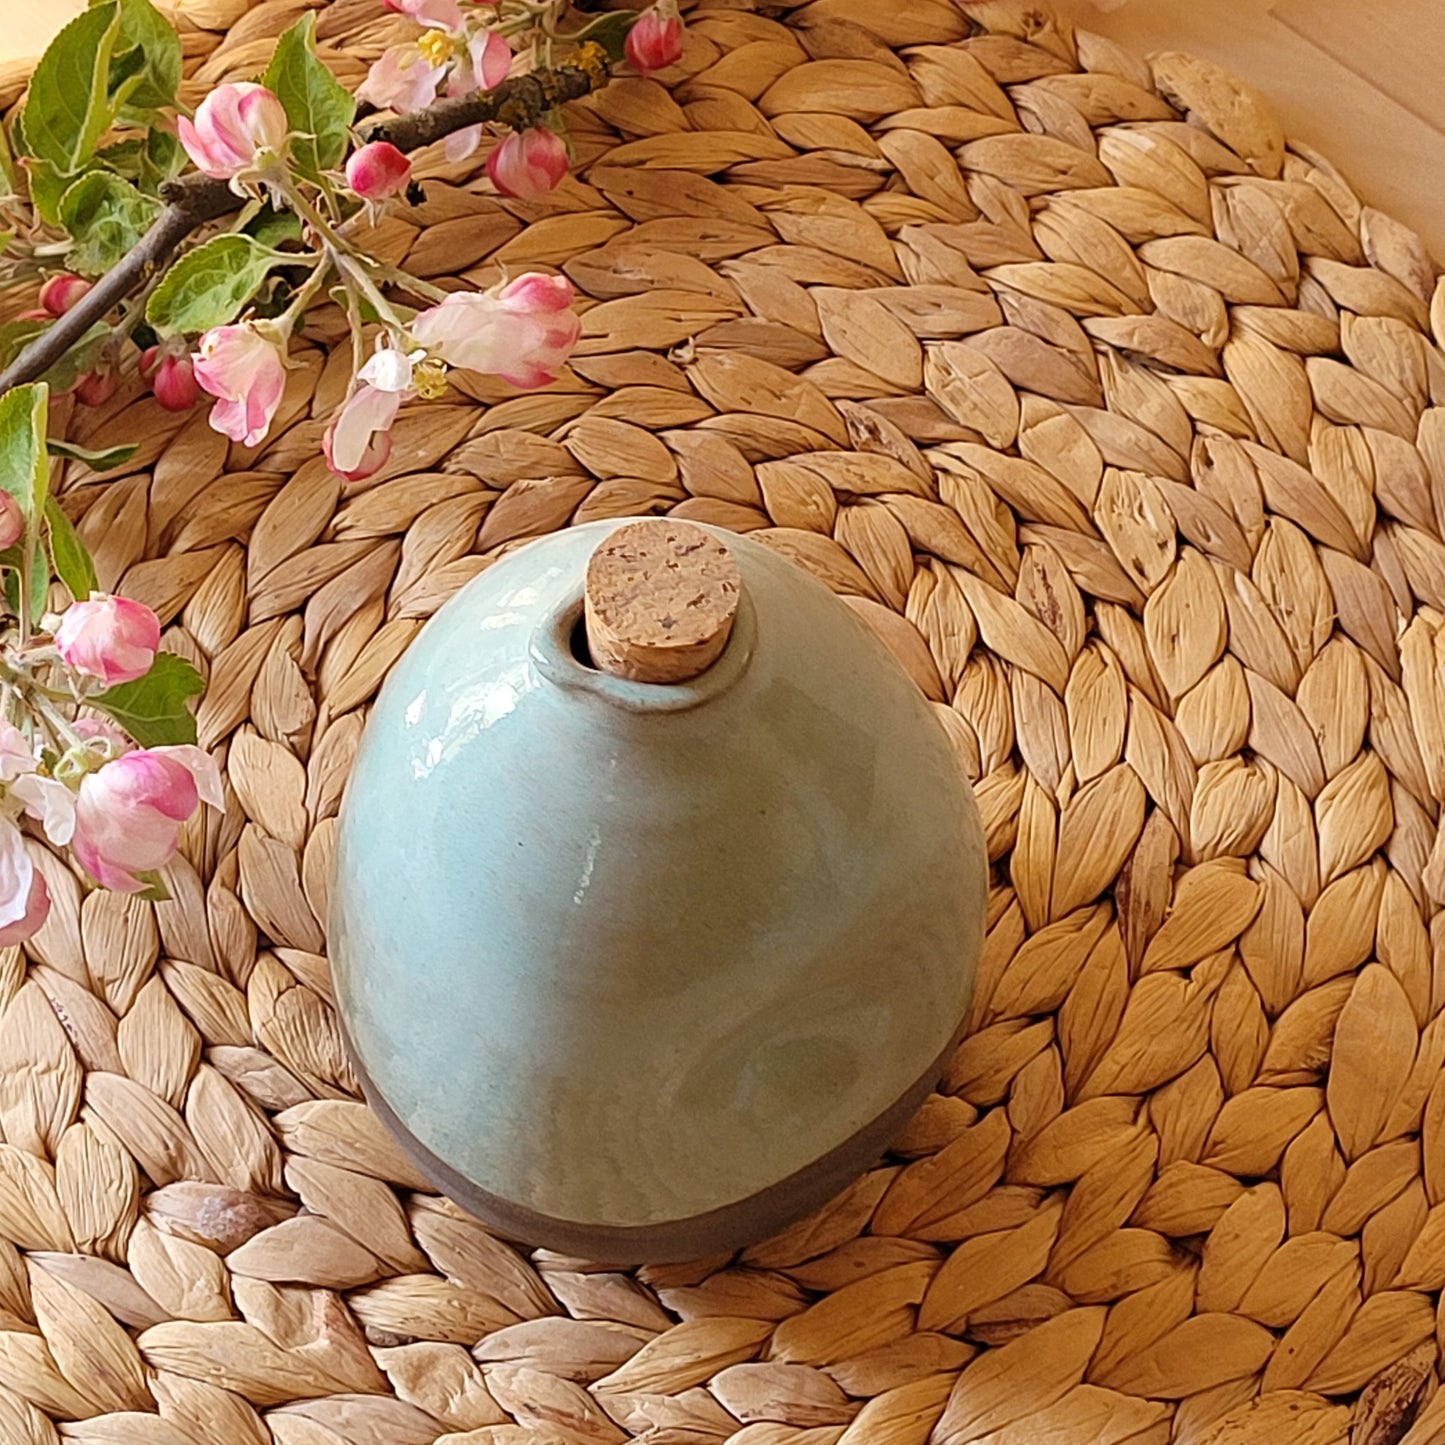 Rustic Stoneware Pottery Oil Dispenser | Unique Housewarming Gift -Made to Order